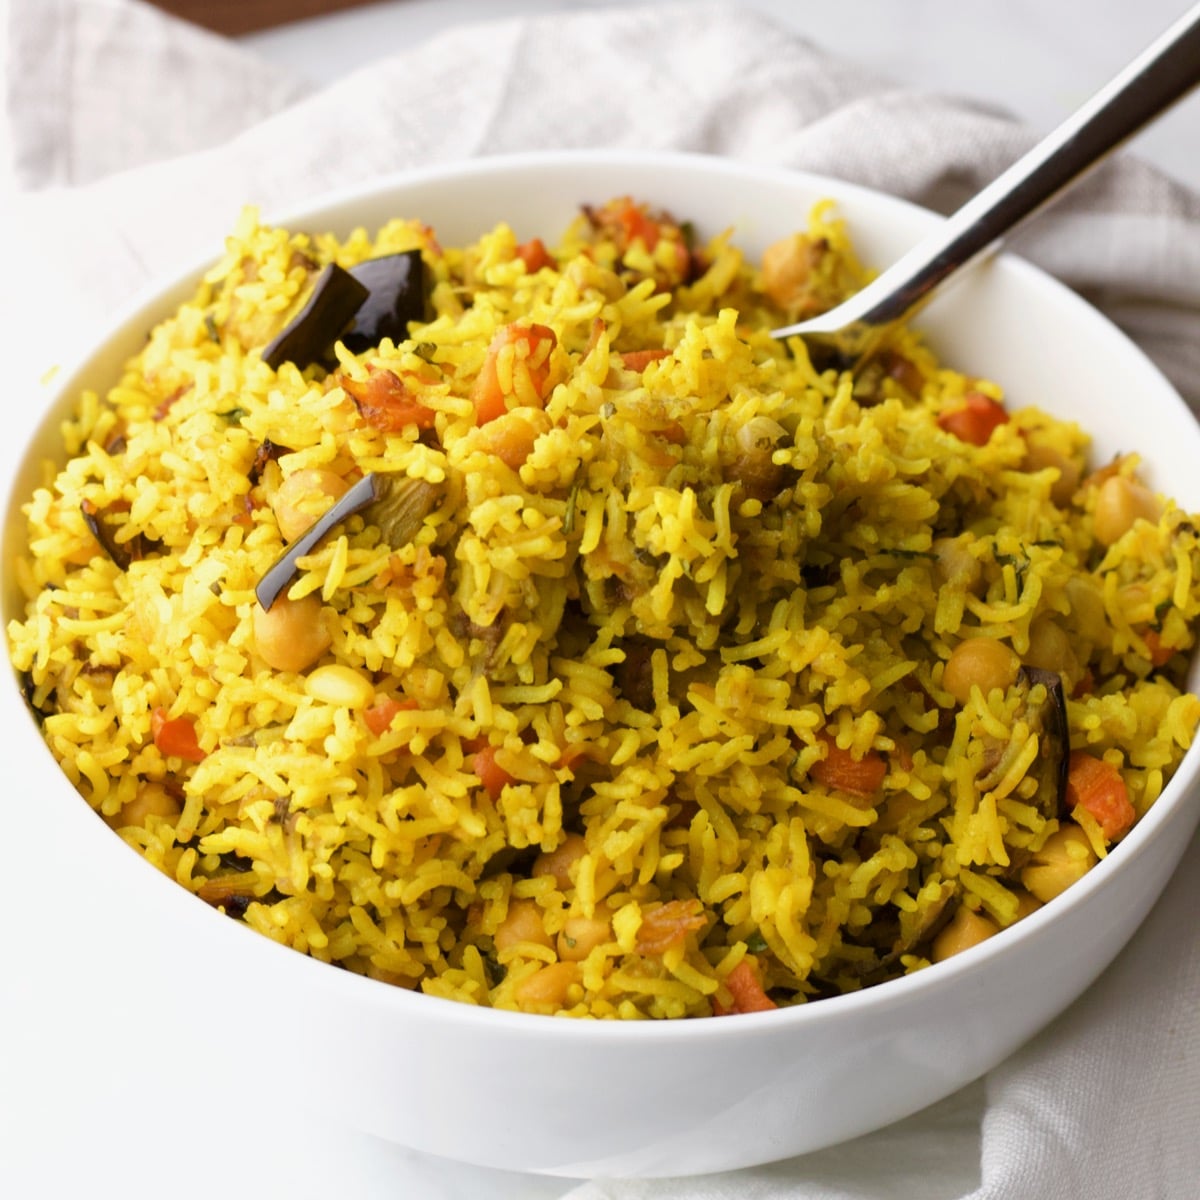 Vegetable rice in white bowl with spoon on white cloth background.